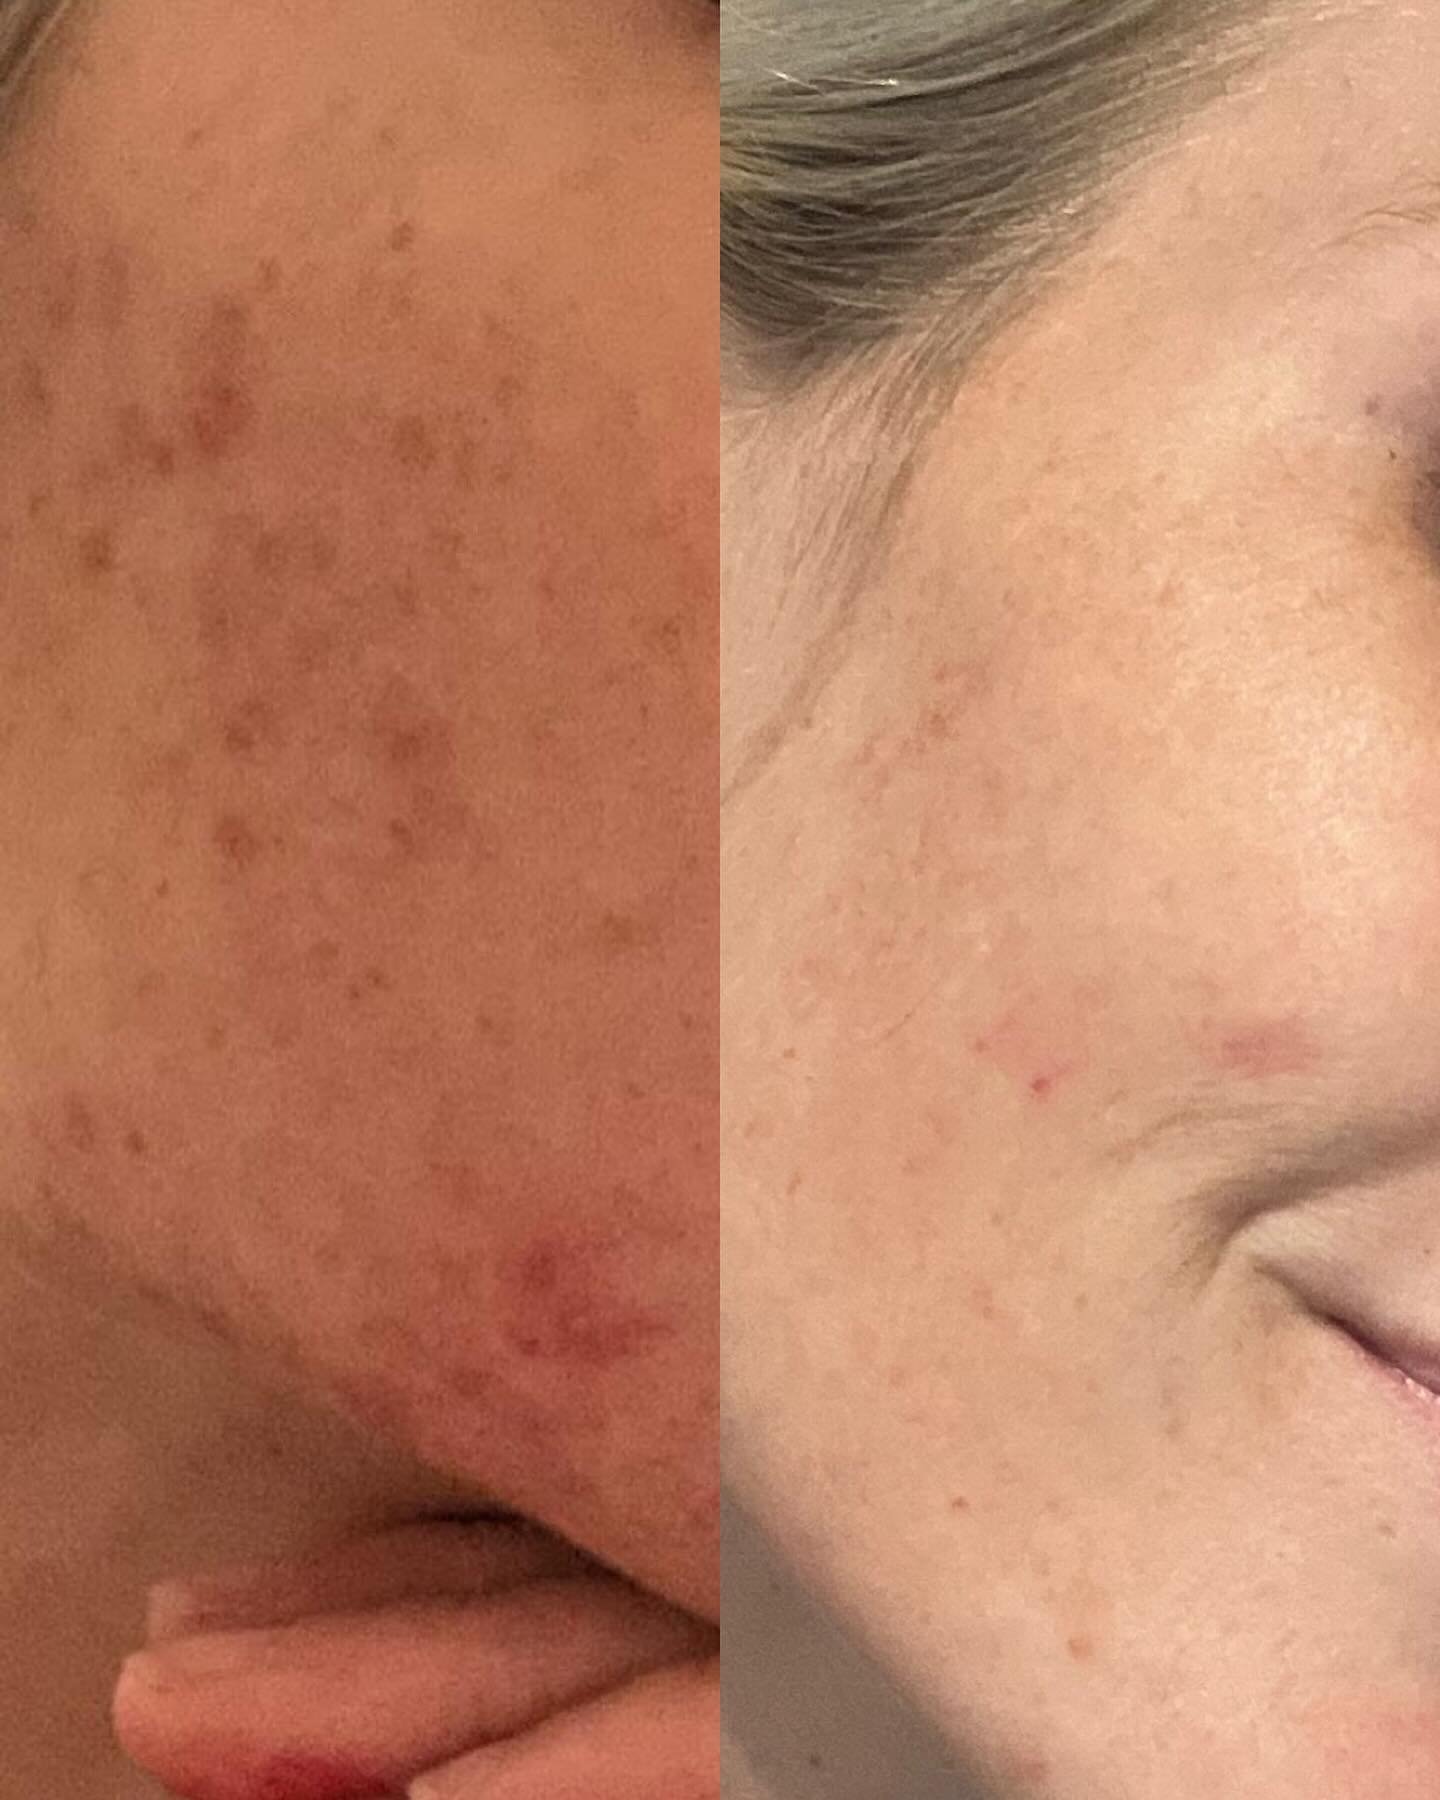 Time + consistency is ALWAYS where the magic happens in skin care. 
Results from PRODUCTS ONLY for a lovely virtual client + mama. 

.
.
.
#acne #acnetreatment #acnejourney #acnefree #acneproneskin #acnefighter #acnefighter #santacruz #dmk #circadia 